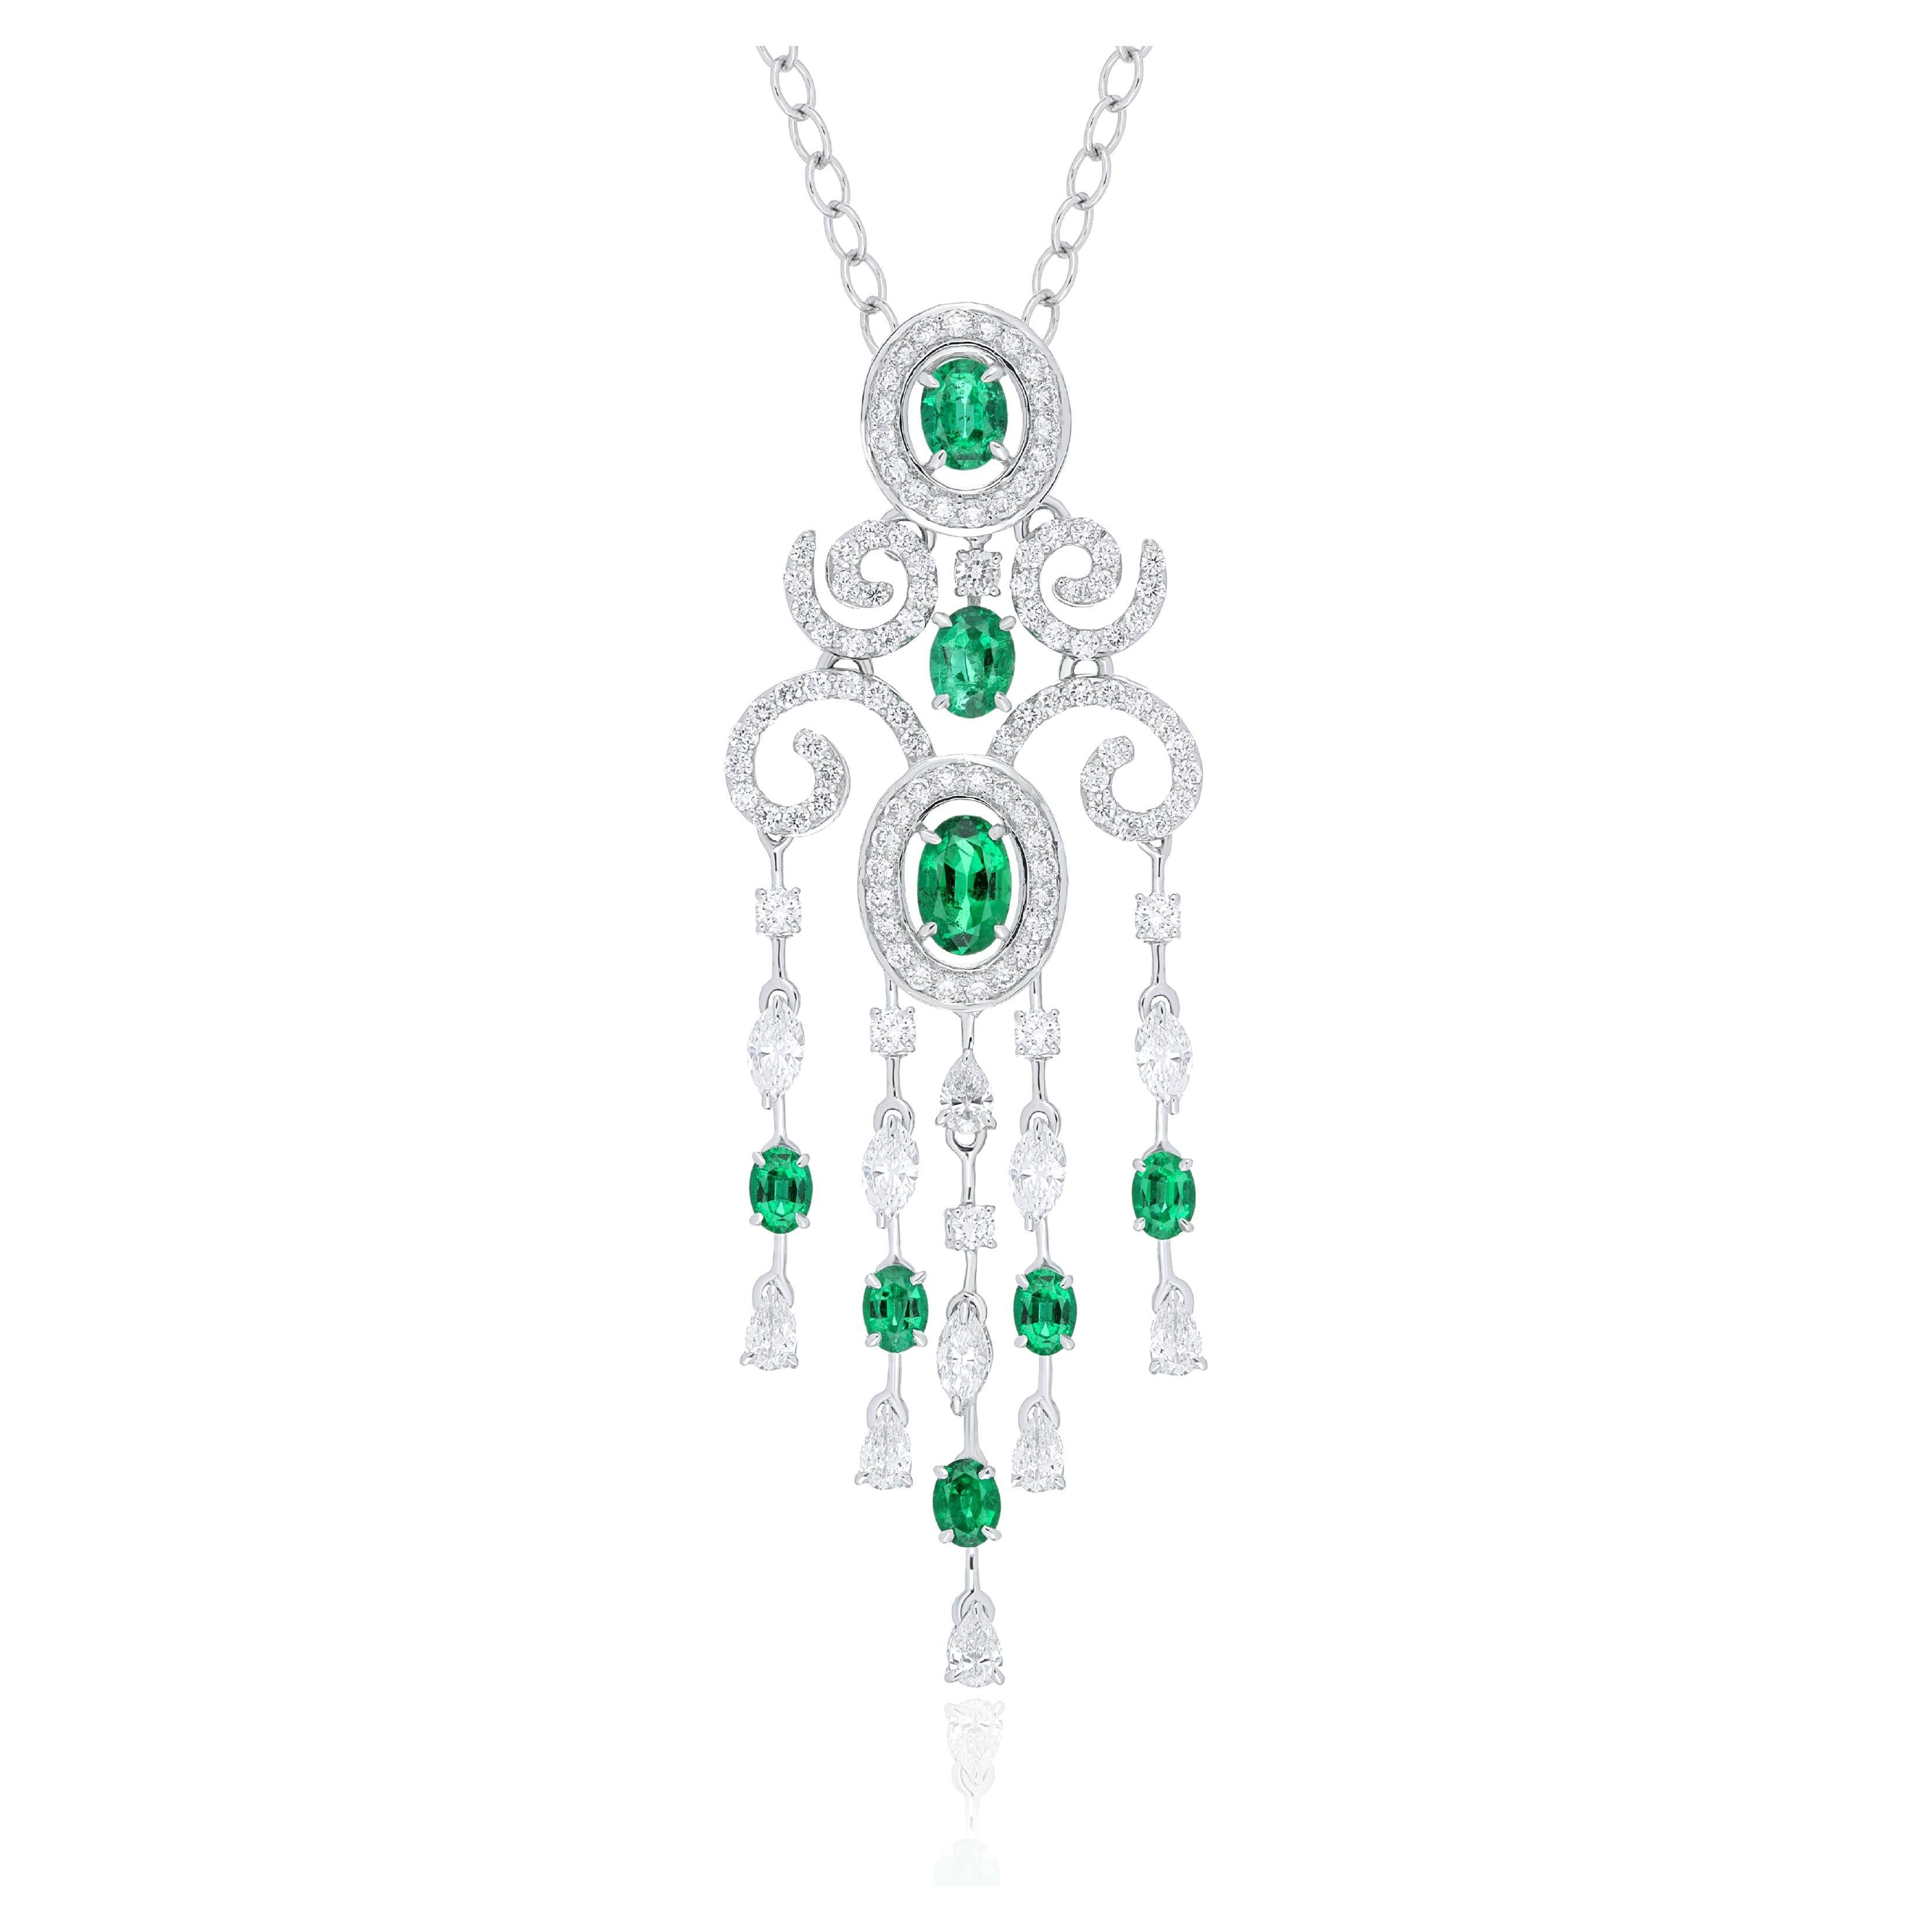 Emerald And Diamond Necklace 18 Karat White Gold jewelry, handcraft Pendant For Sale